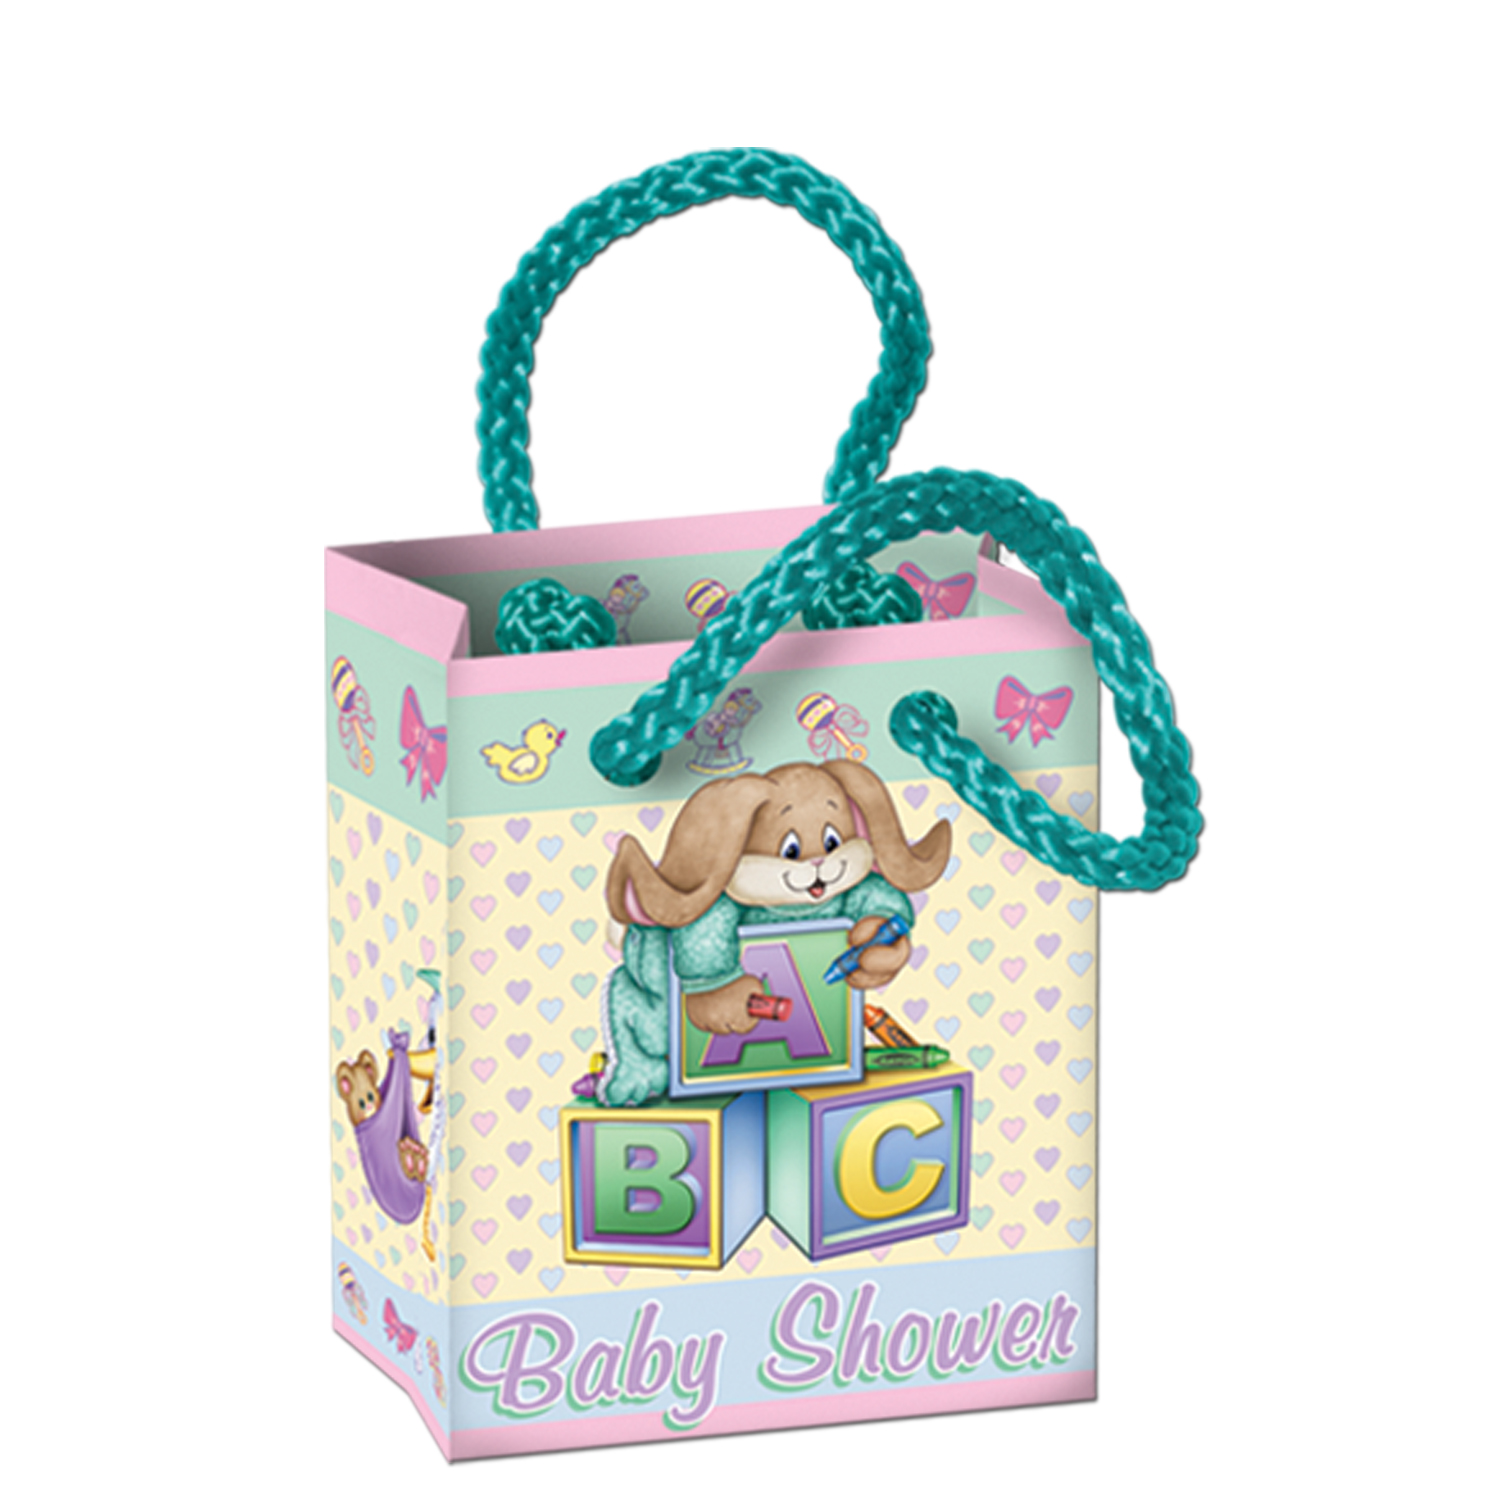 Cuddle-Time Mini Gift BAG Party Favors